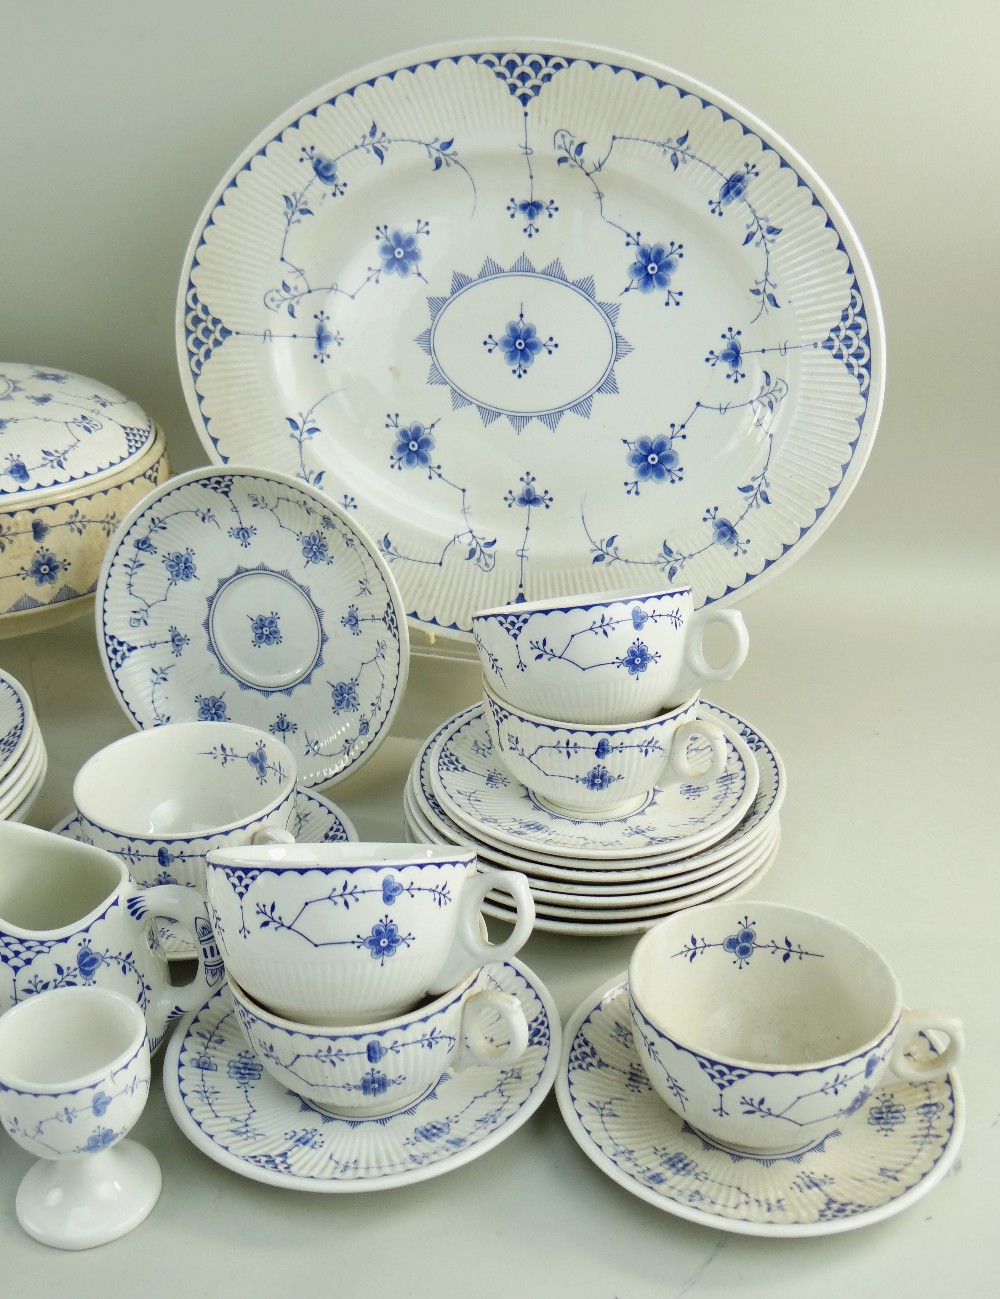 MATCHED PART SERVICE OF 'DENMARK' PATTERN BLUE & WHITE DINNERWARES, mainly by Furnivals Ltd., - Image 2 of 20